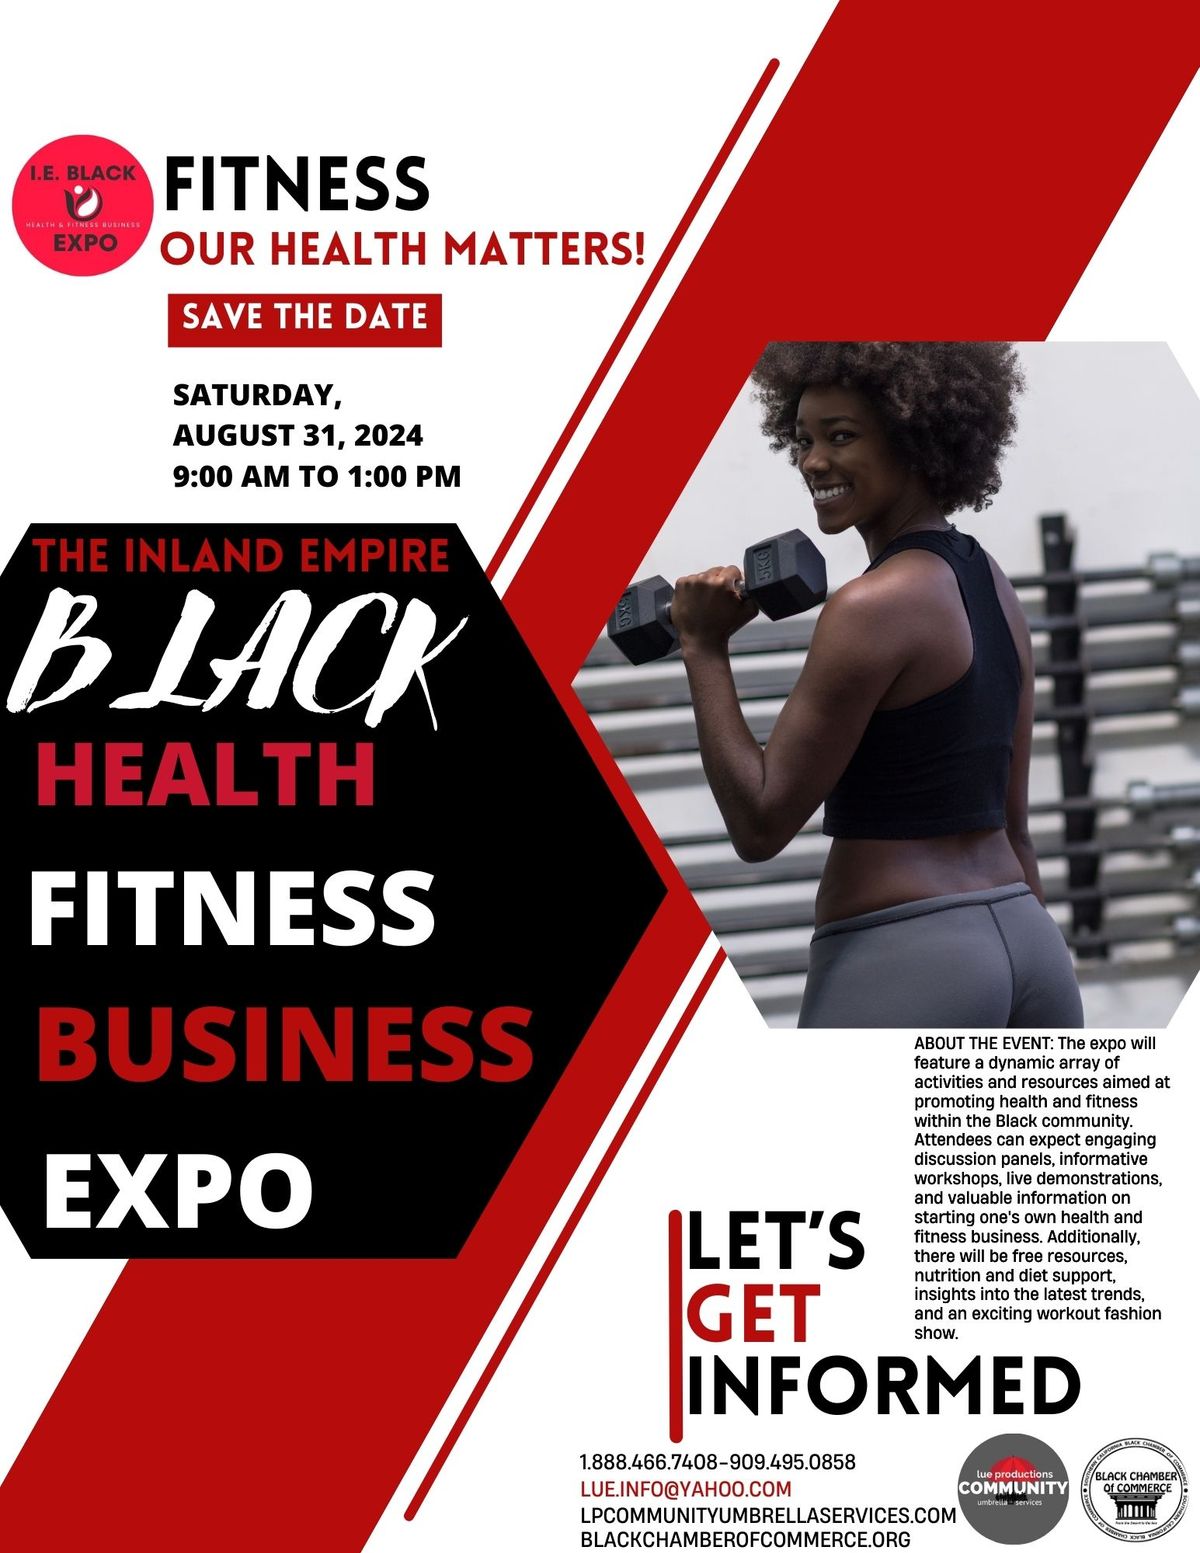 The Inland empire Black Health and Fitness Business EXPO